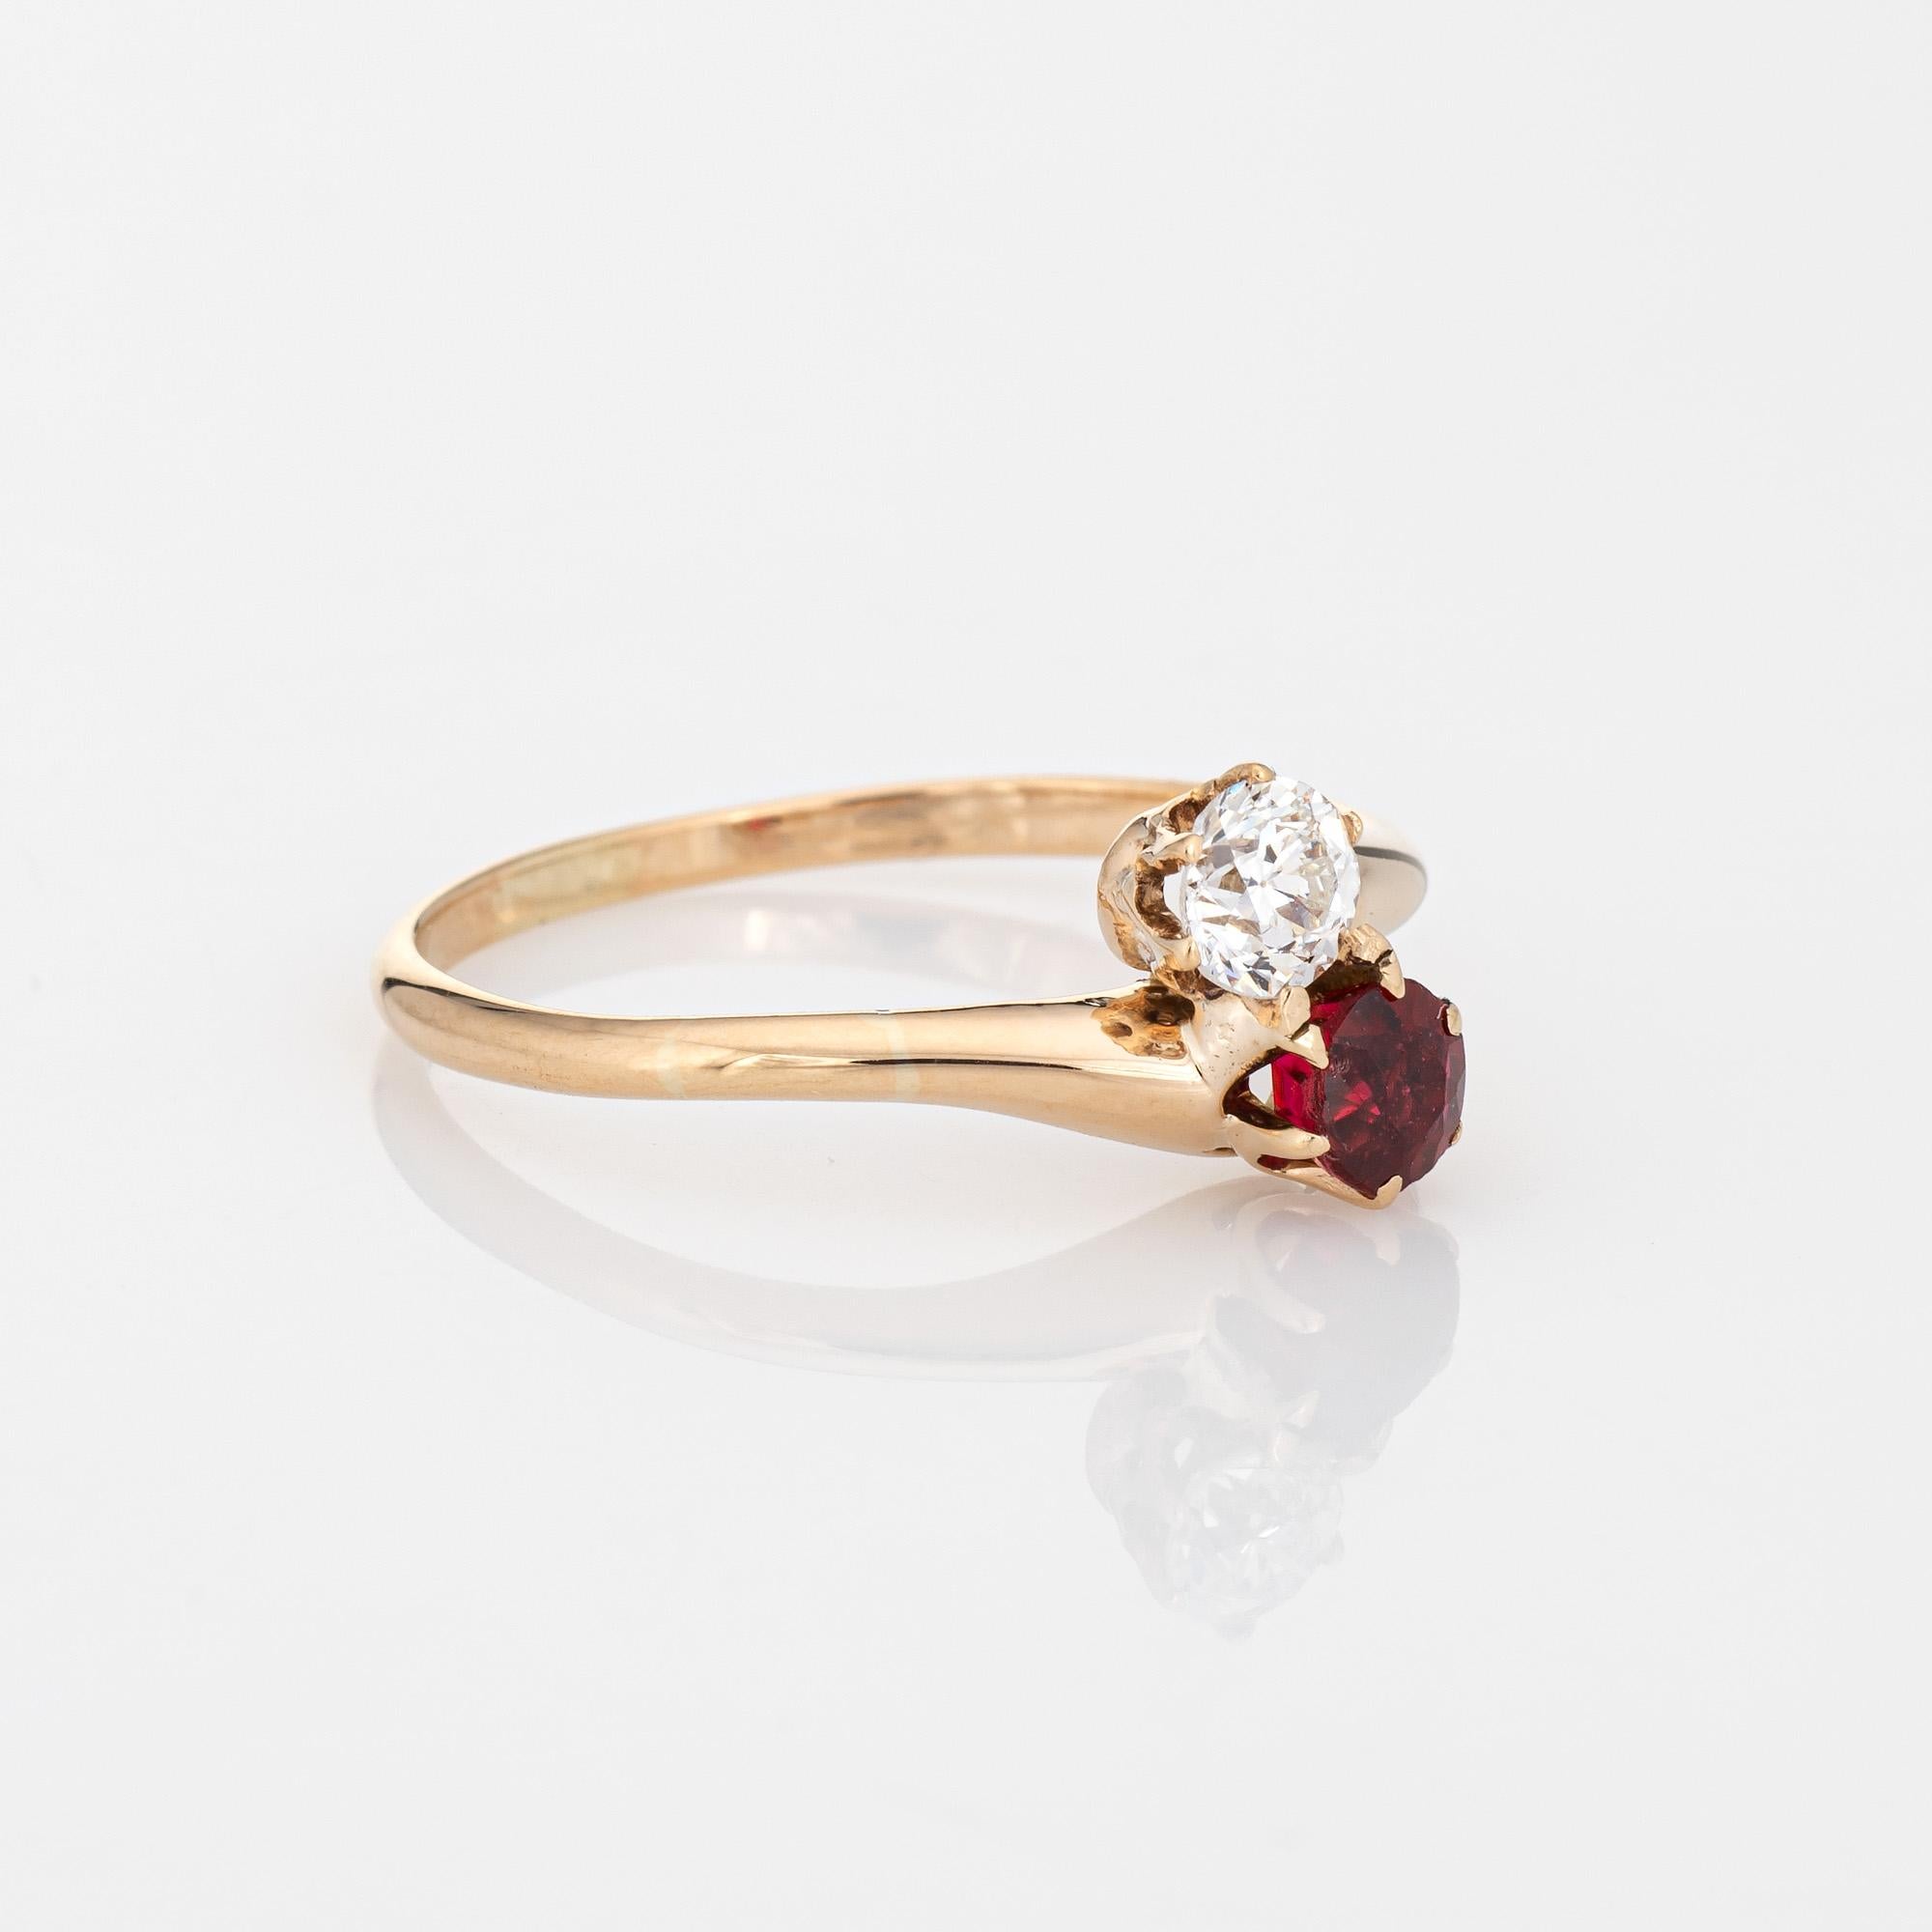 Finely detailed vintage Art Deco era diamond & synthetic ruby 'moi et toi' ring crafted in 14k yellow gold (circa 1920s to 1930s).  

Old European cut diamond is estimated at 0.25 carats (estimated at I-J color and VS2-SI1 clarity). The lab created